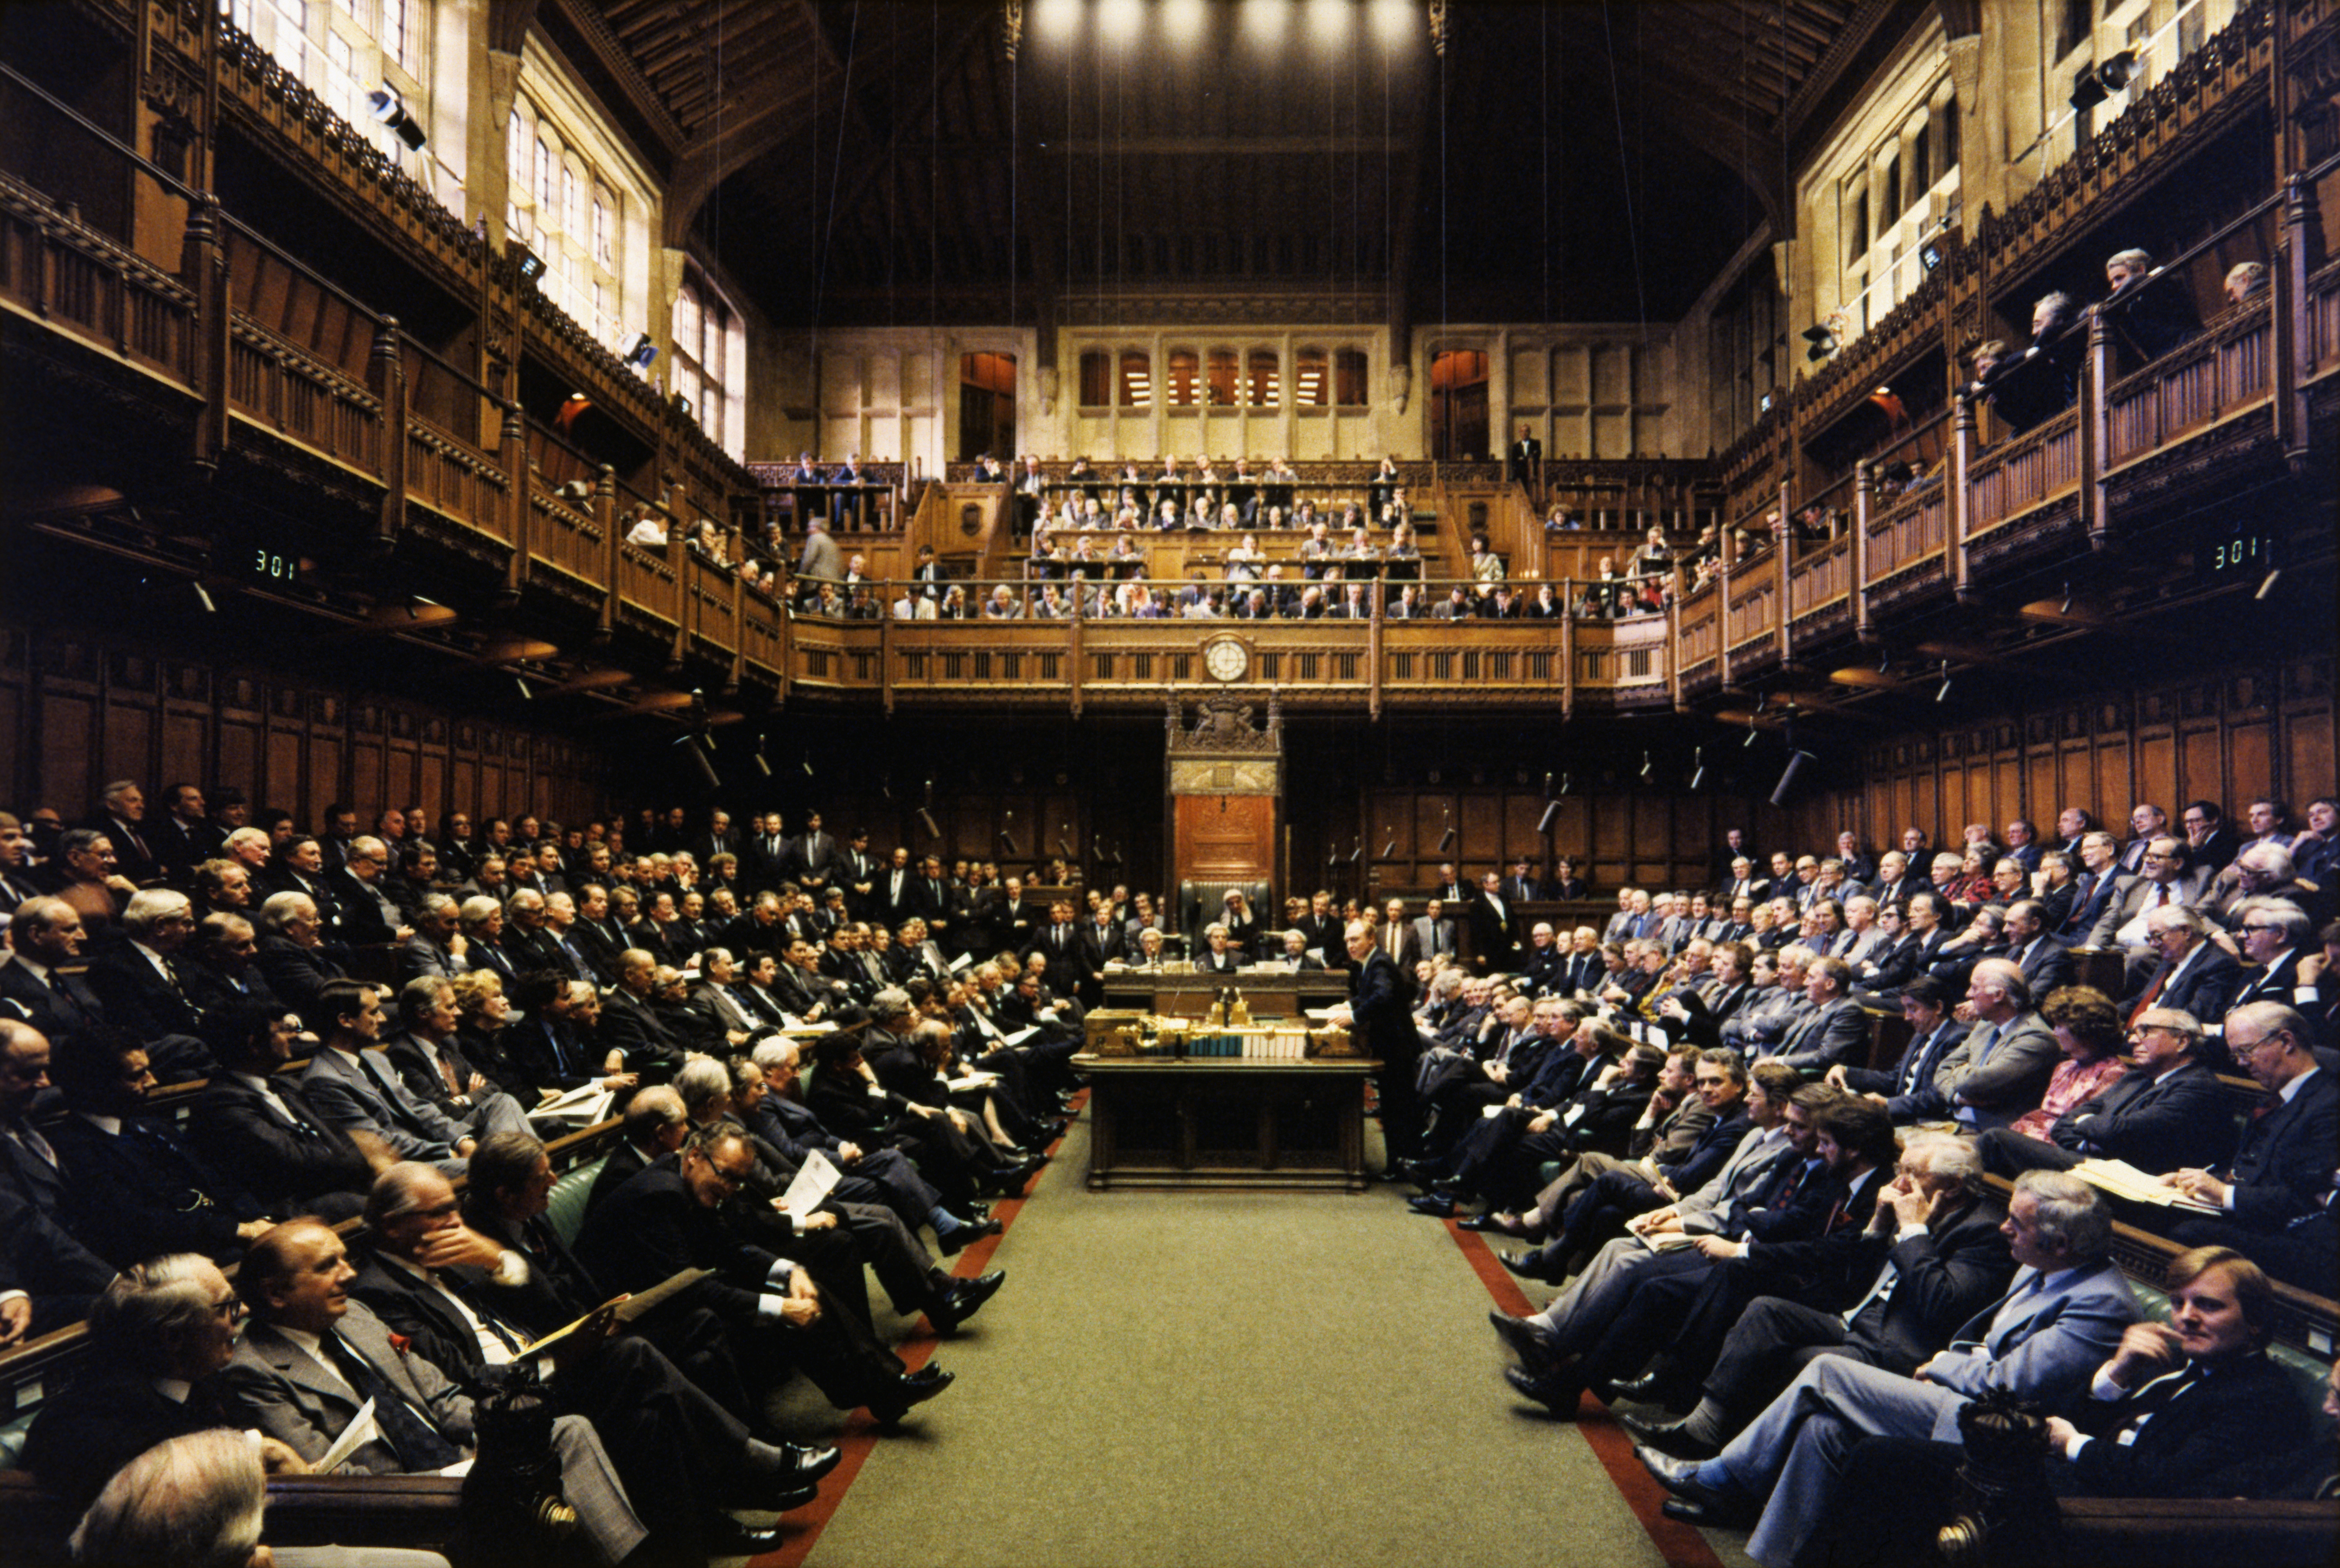 Members of the United Kingdom's House of Commons sit in session on April 12, 1986. (Bettmann/Getty Images)